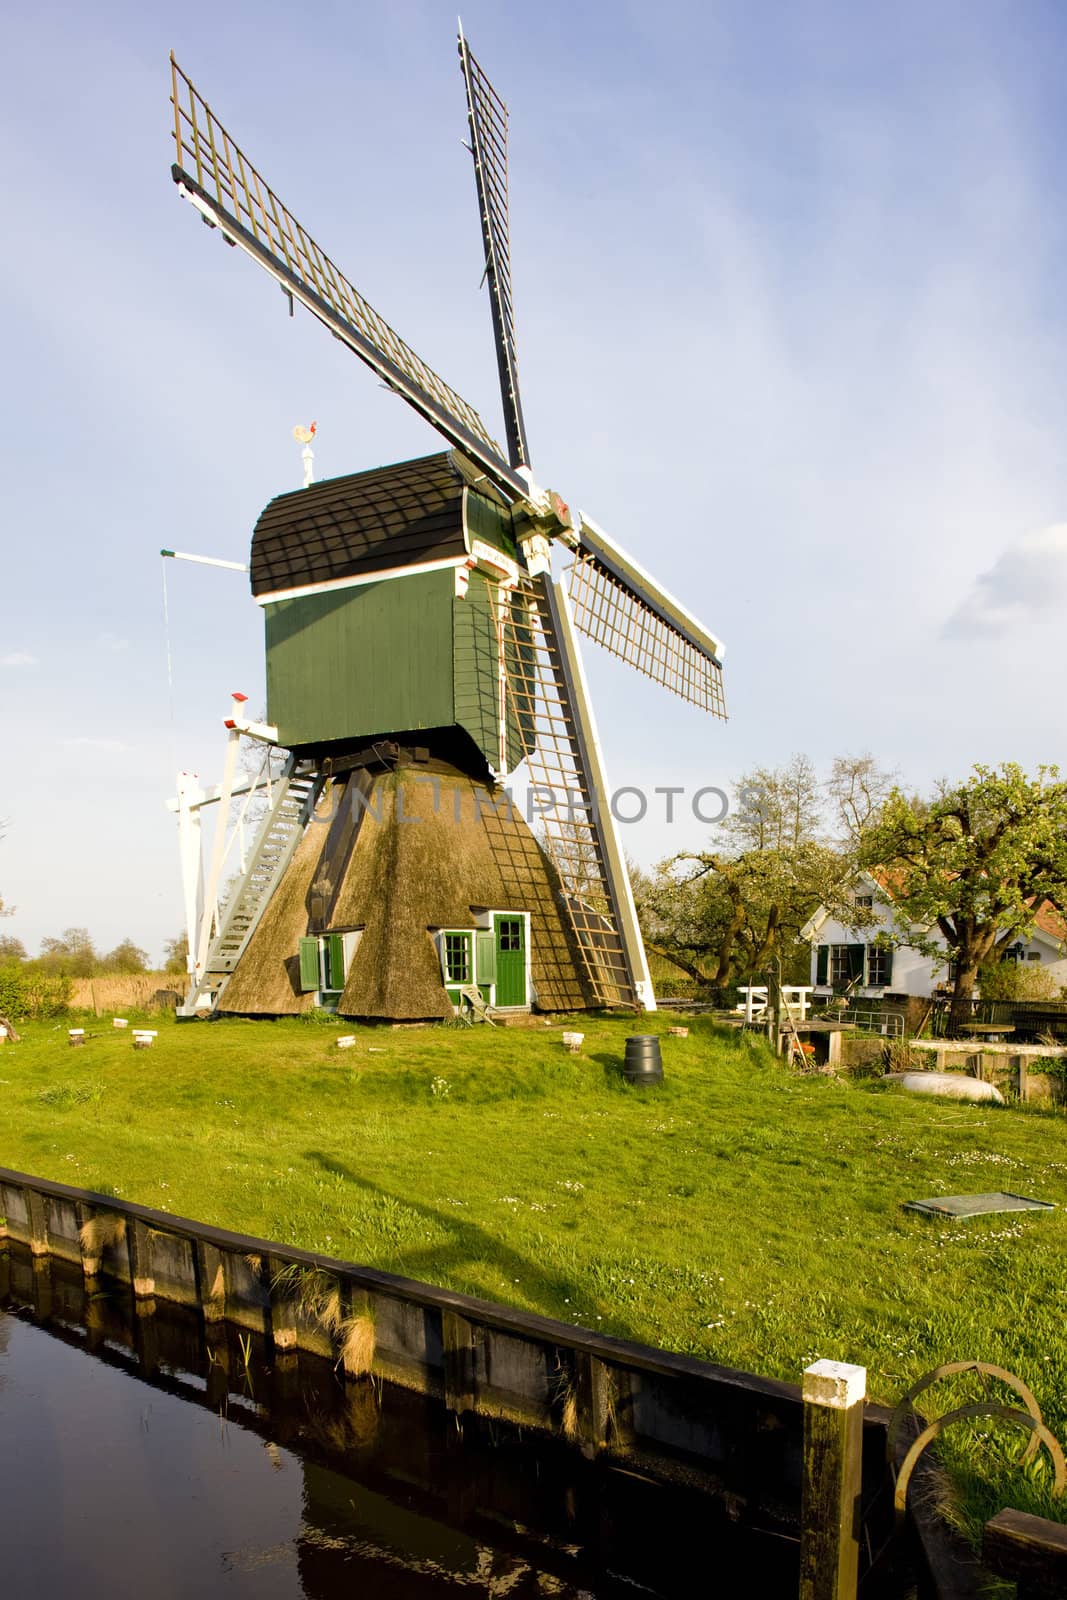 windmill, Tienhoven, Netherlands by phbcz